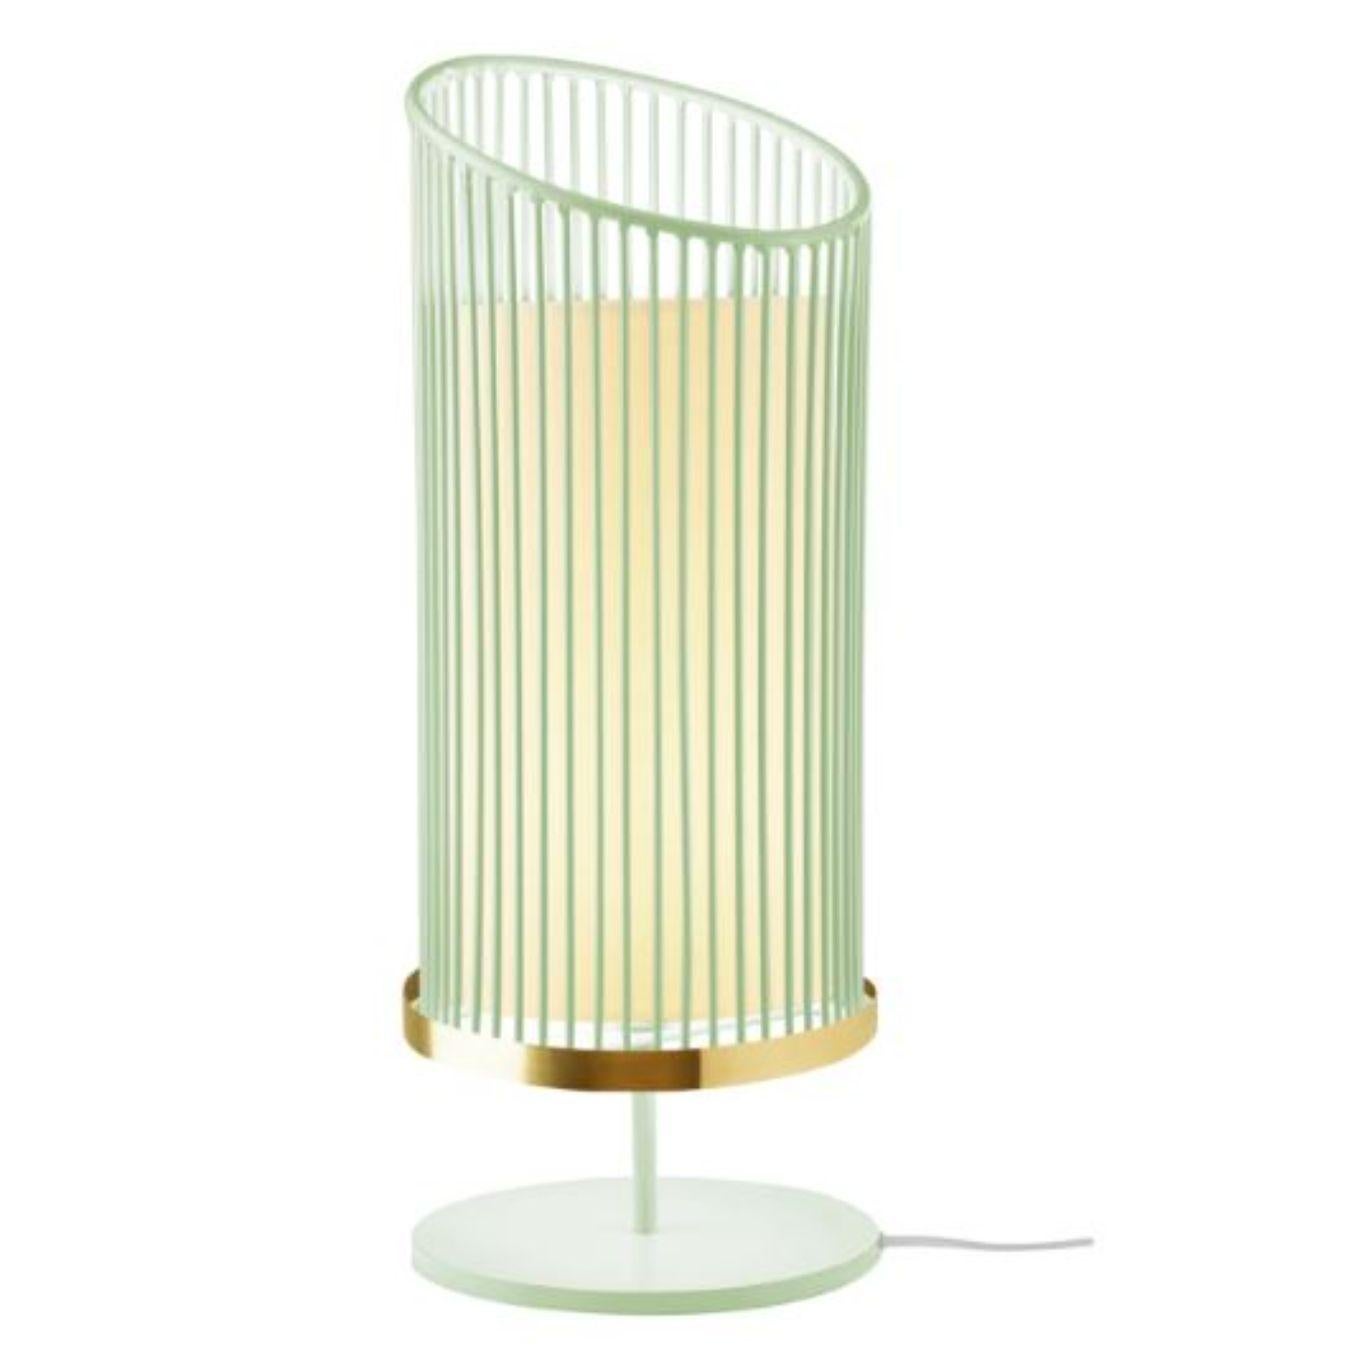 Dream new spider table lamp with brass ring by Dooq.
Dimensions: W 24 x D 24 x H 60 cm.
Materials: lacquered metal, polished or brushed metal, brass.
Also available in different colors and materials.

Information:
230V/50Hz
E27/1x20W